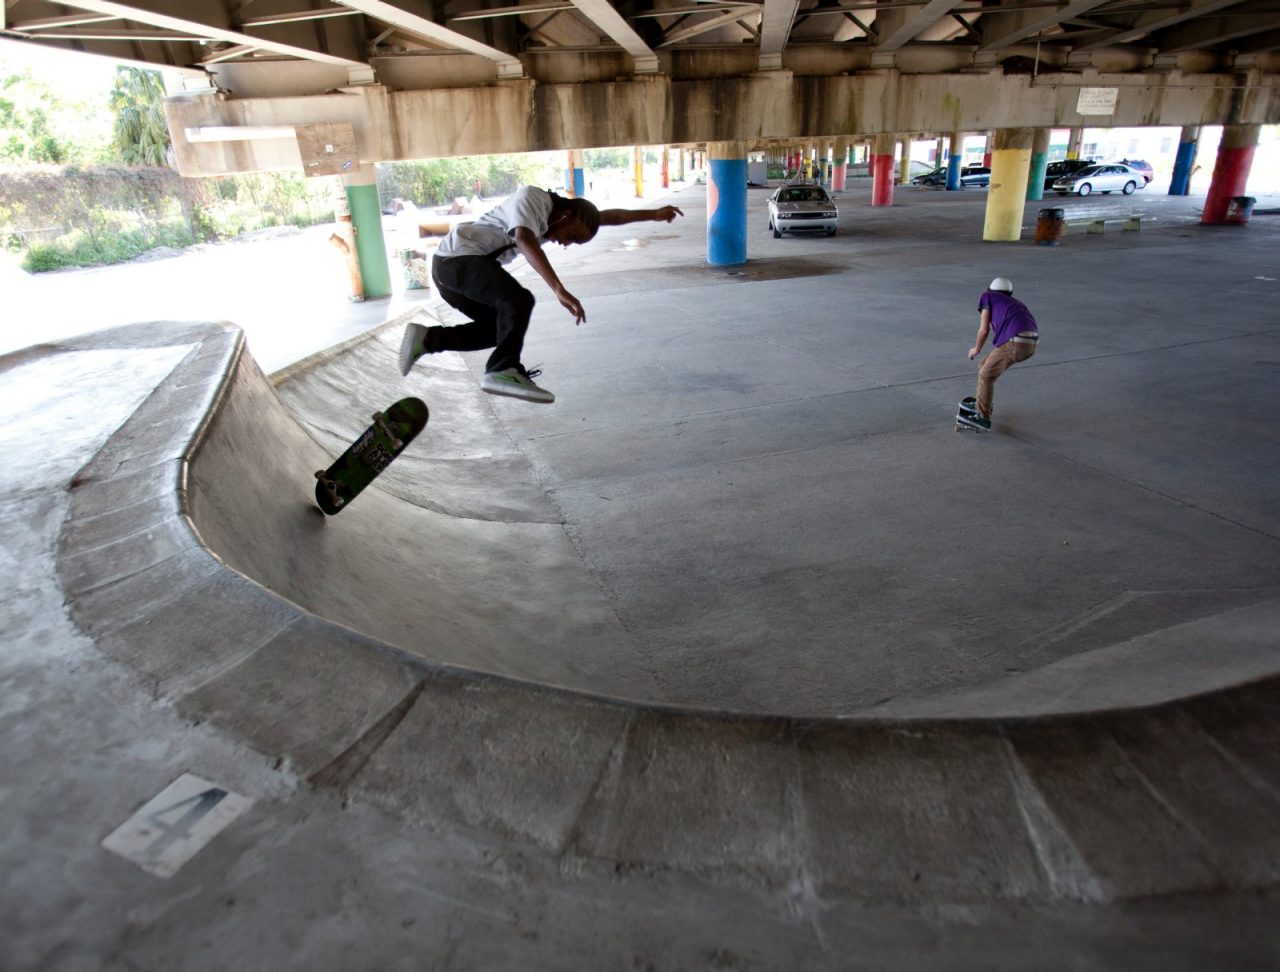 Youth using a public skateboard ramp underneath the I-610 overpass.